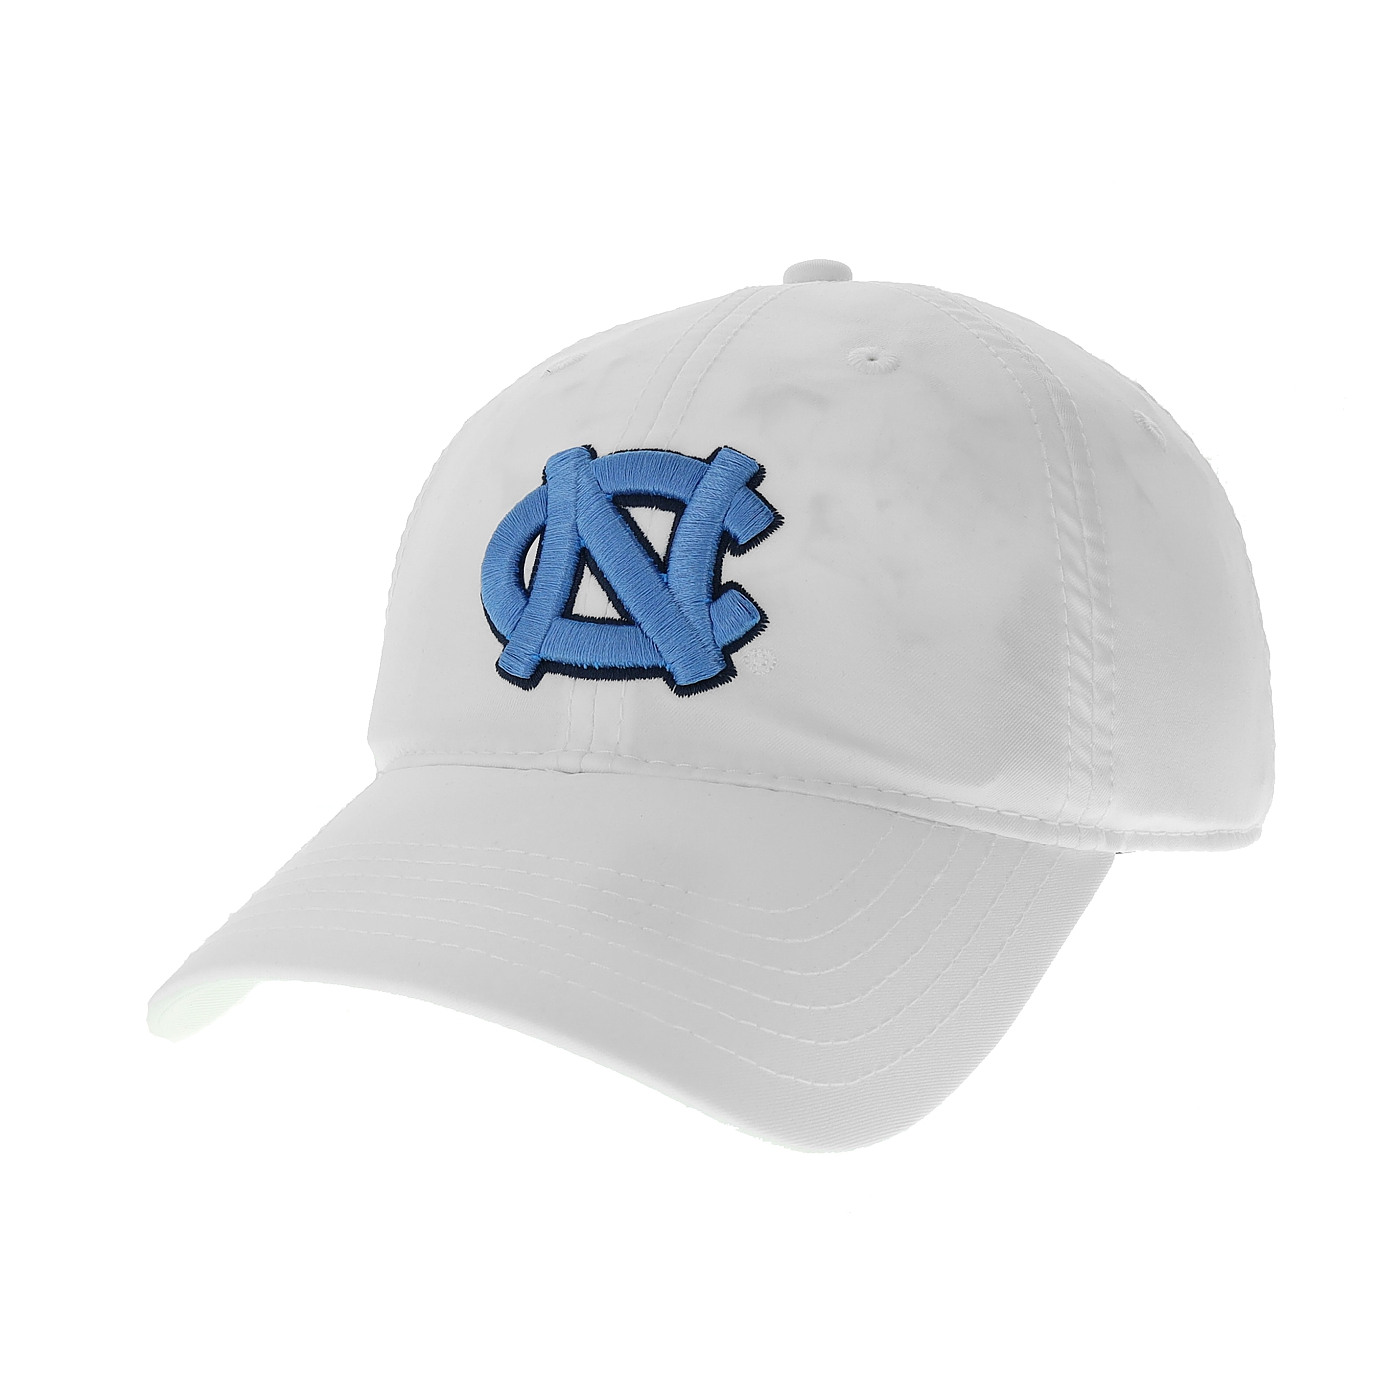 Johnny T-shirt - North Carolina Tar Heels - Cool-Fit Performance Hat  (White) by Legacy